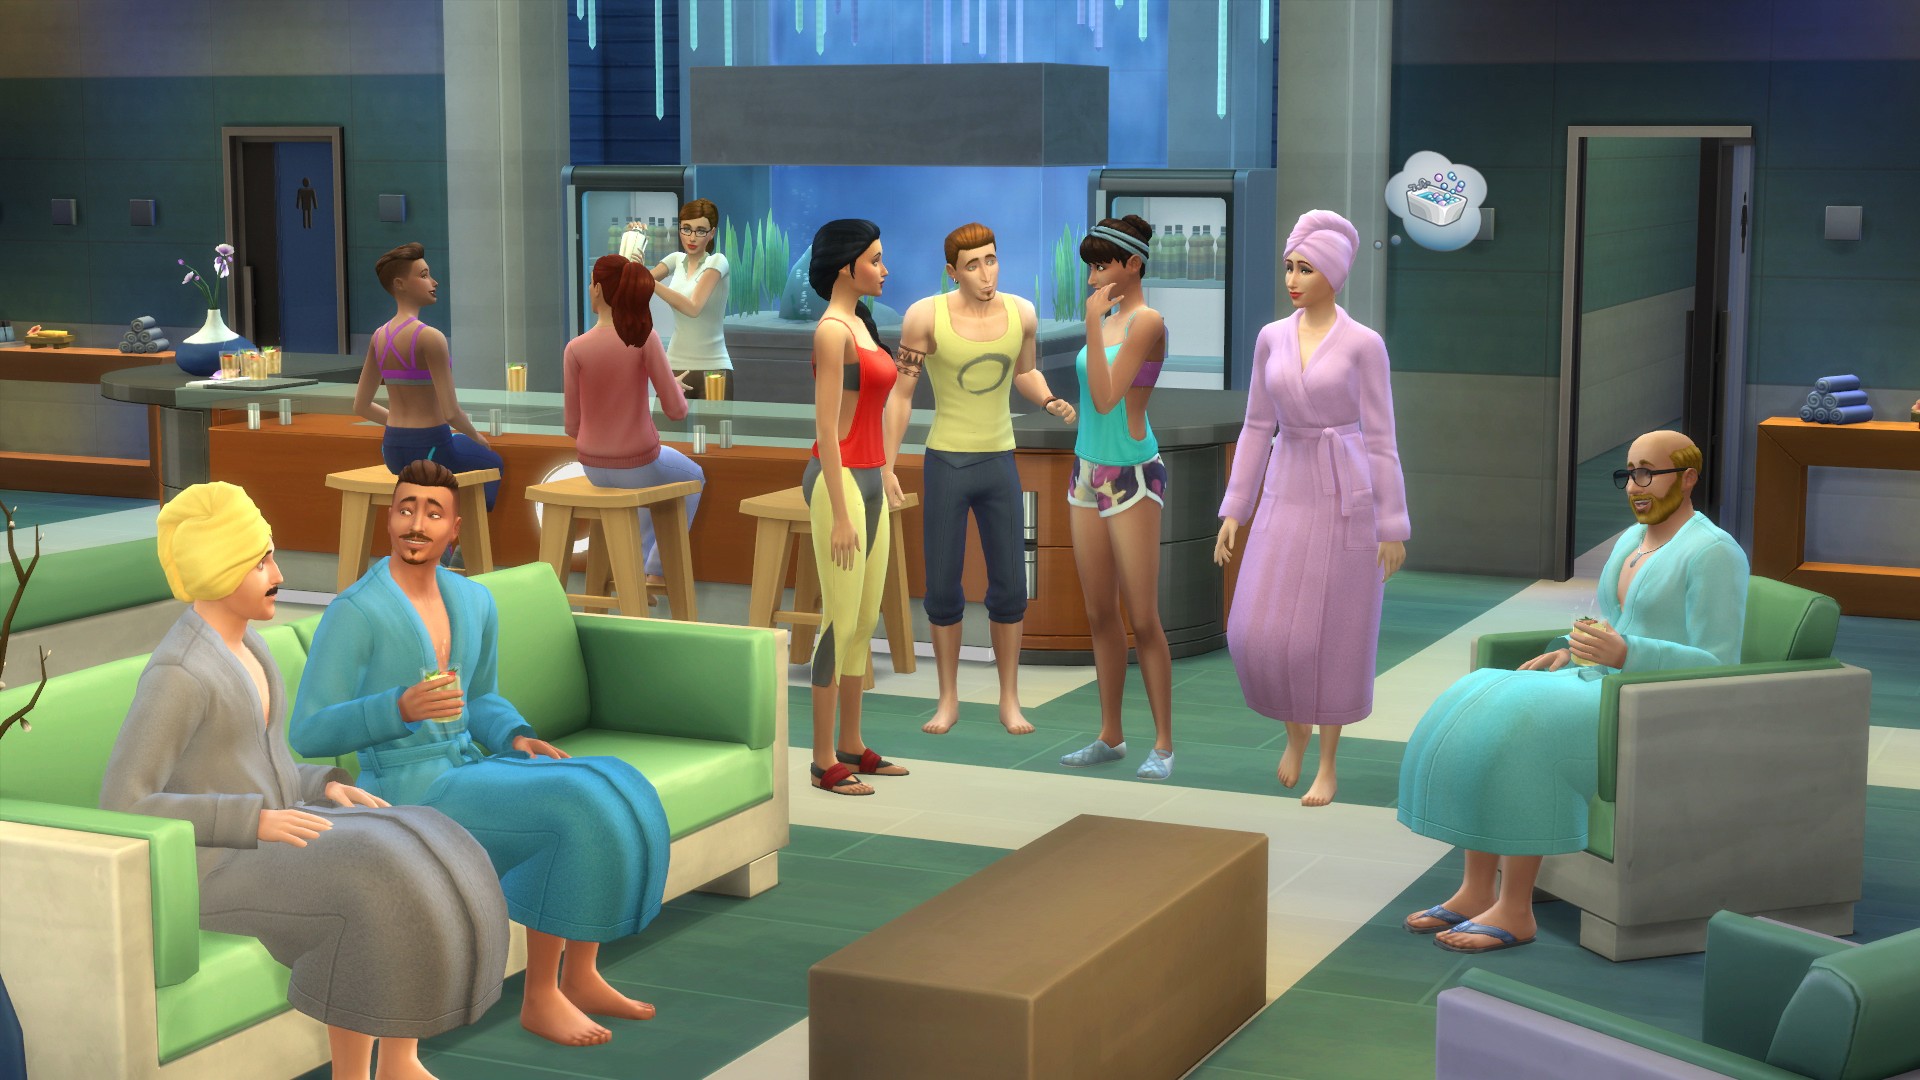 The Sims 4 Spa Day is Now Available, Plus Mouse and Keyboard Support on Xbox One